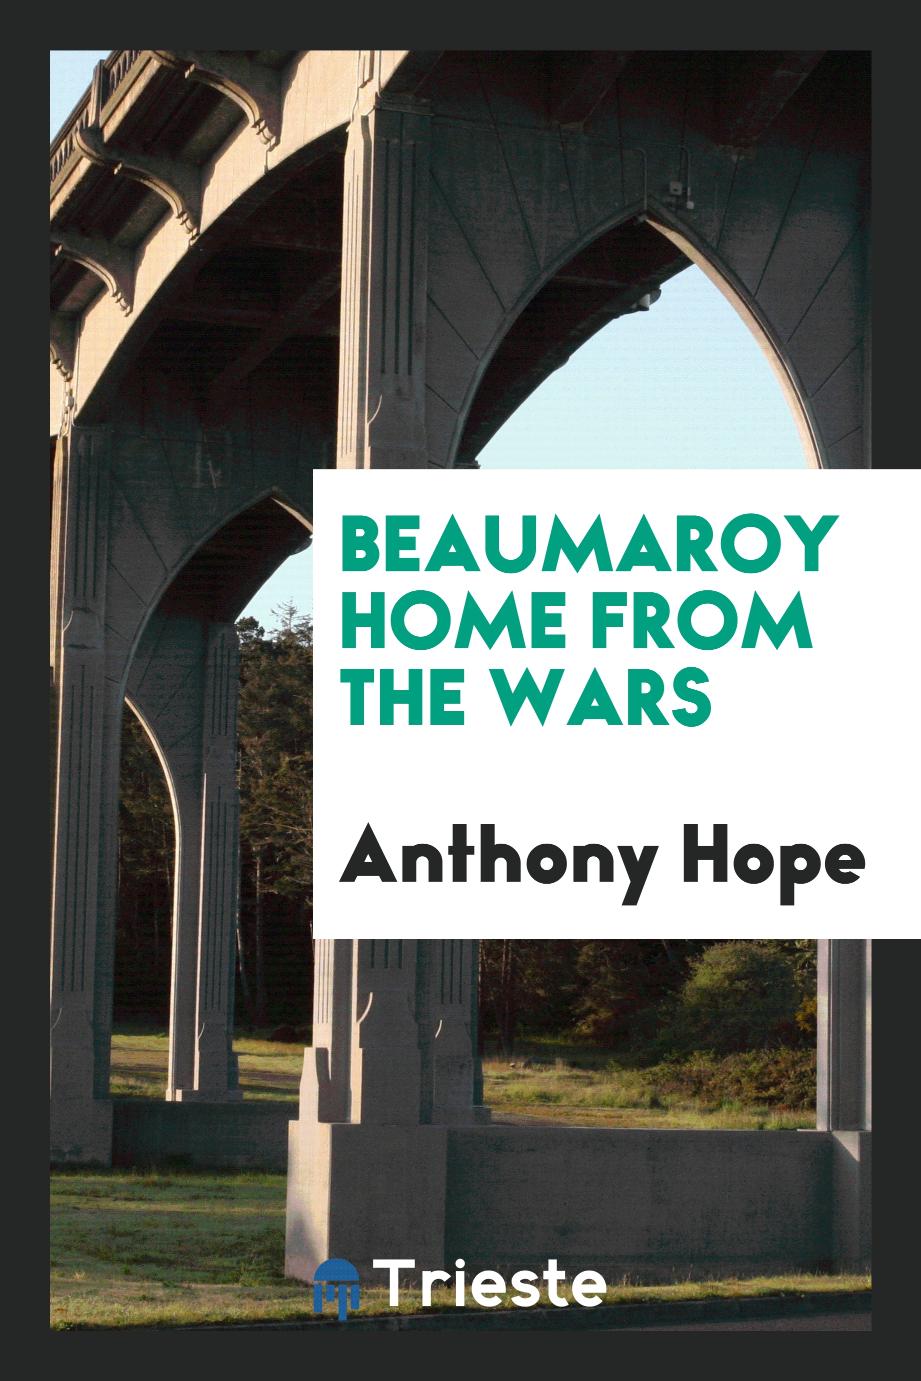 Beaumaroy home from the wars